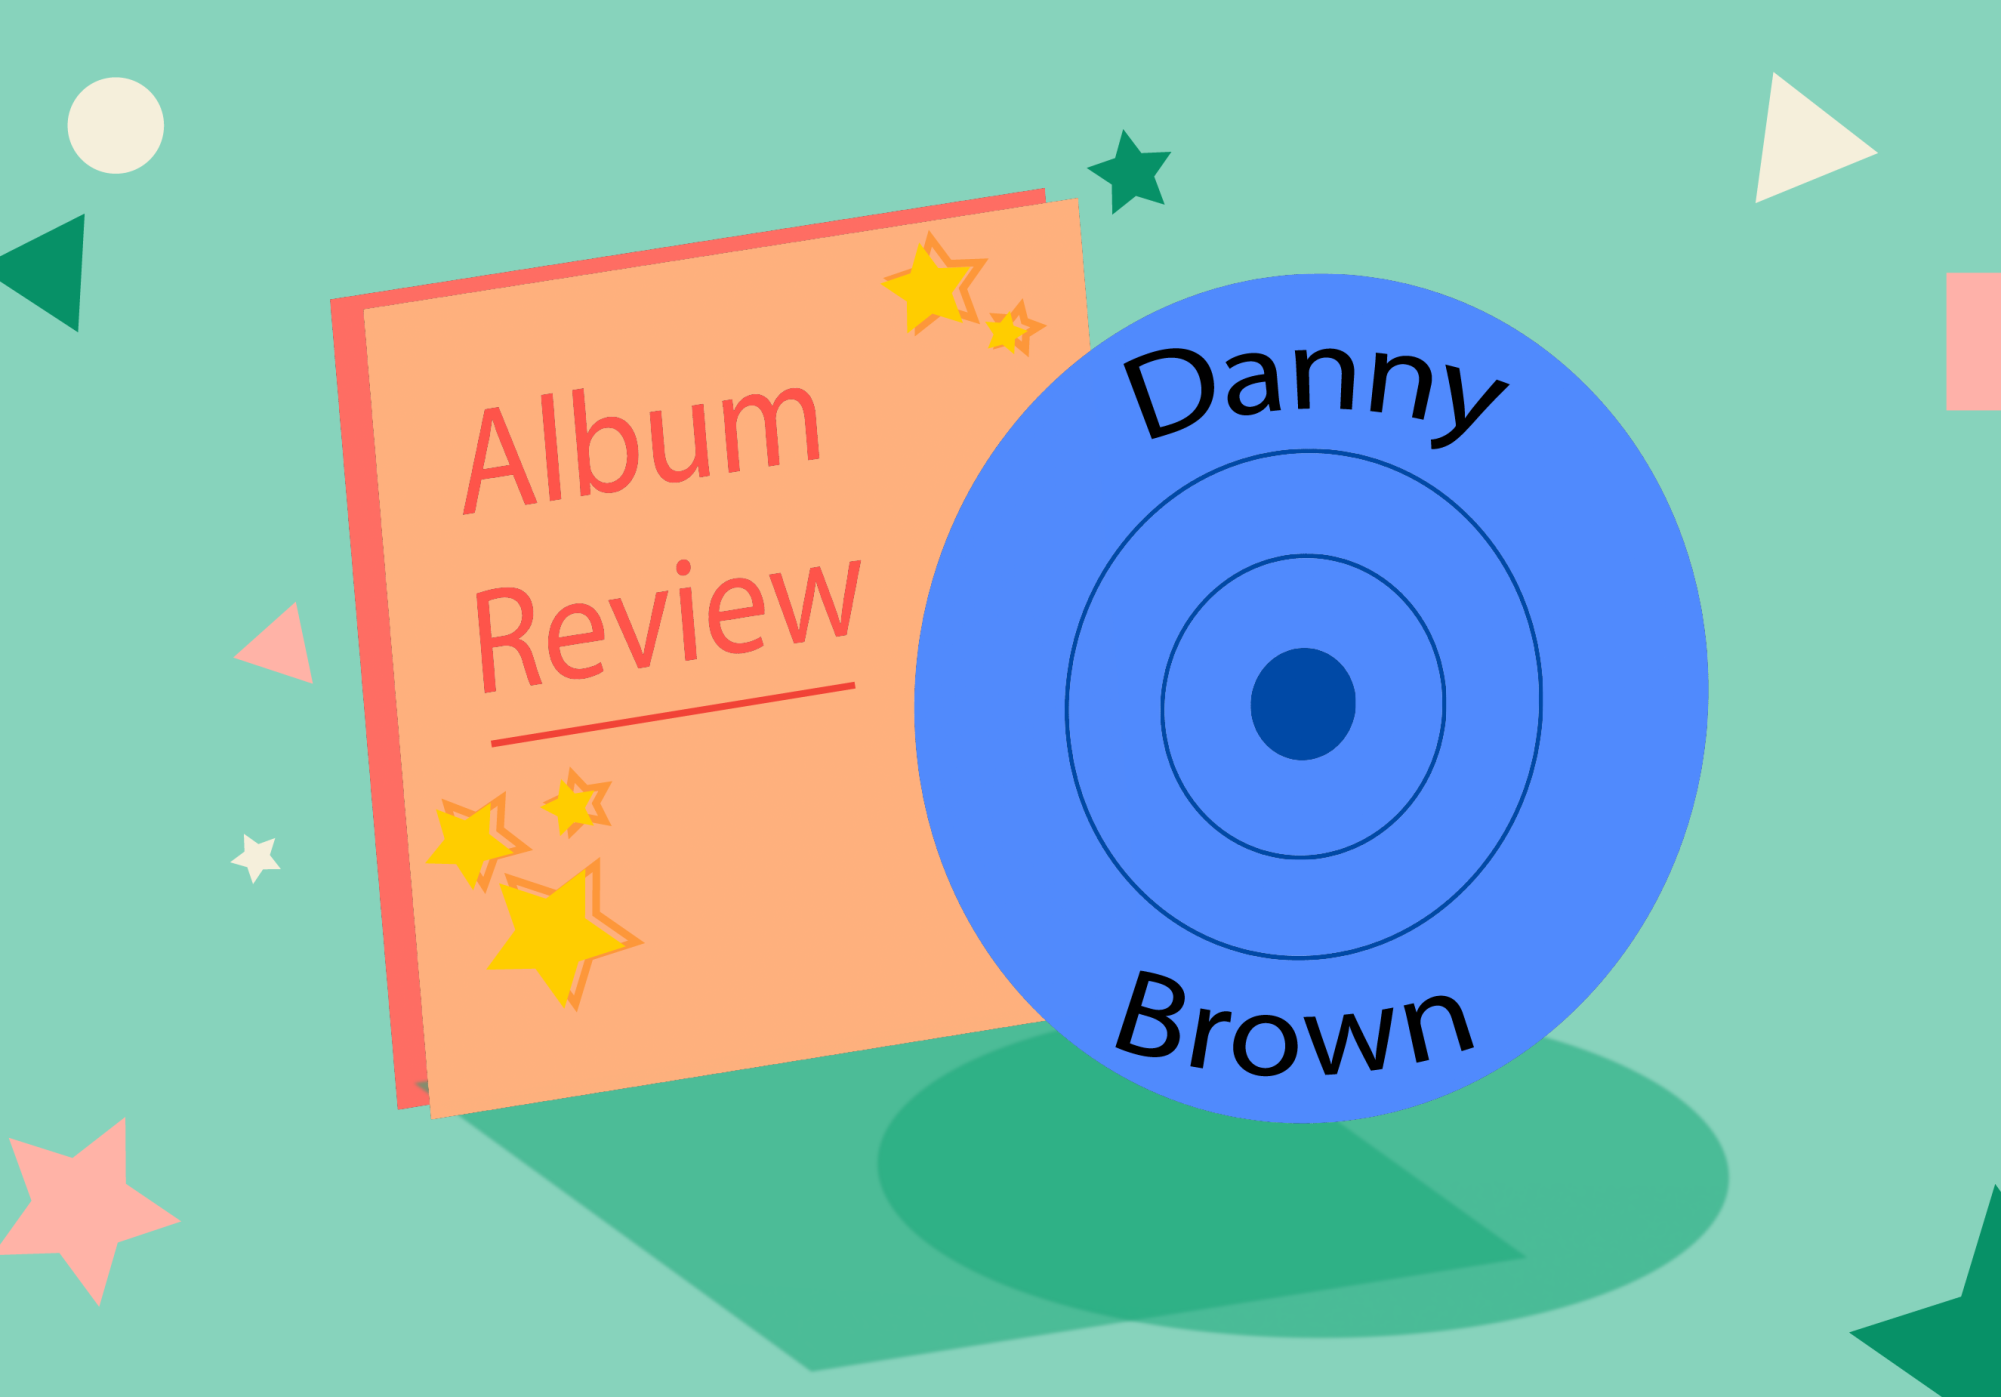 Brown released the album on Friday.